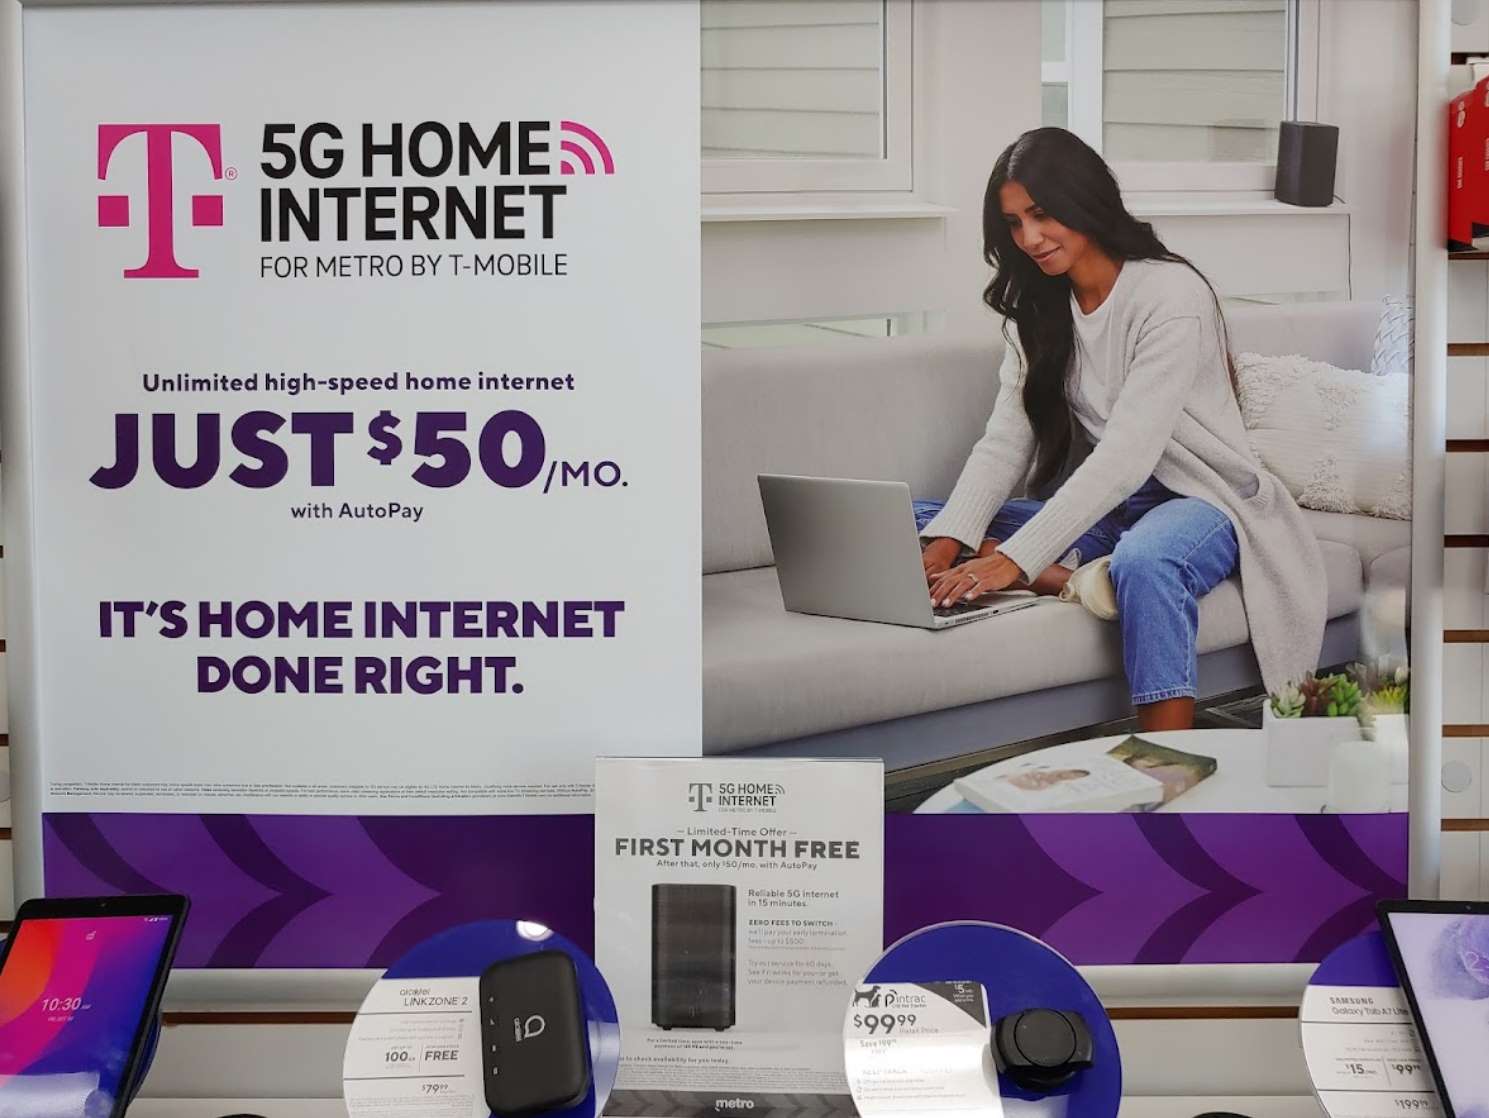 Metro by T-Mobile Offering First Month Free On 5G Home Internet - BestMVNO